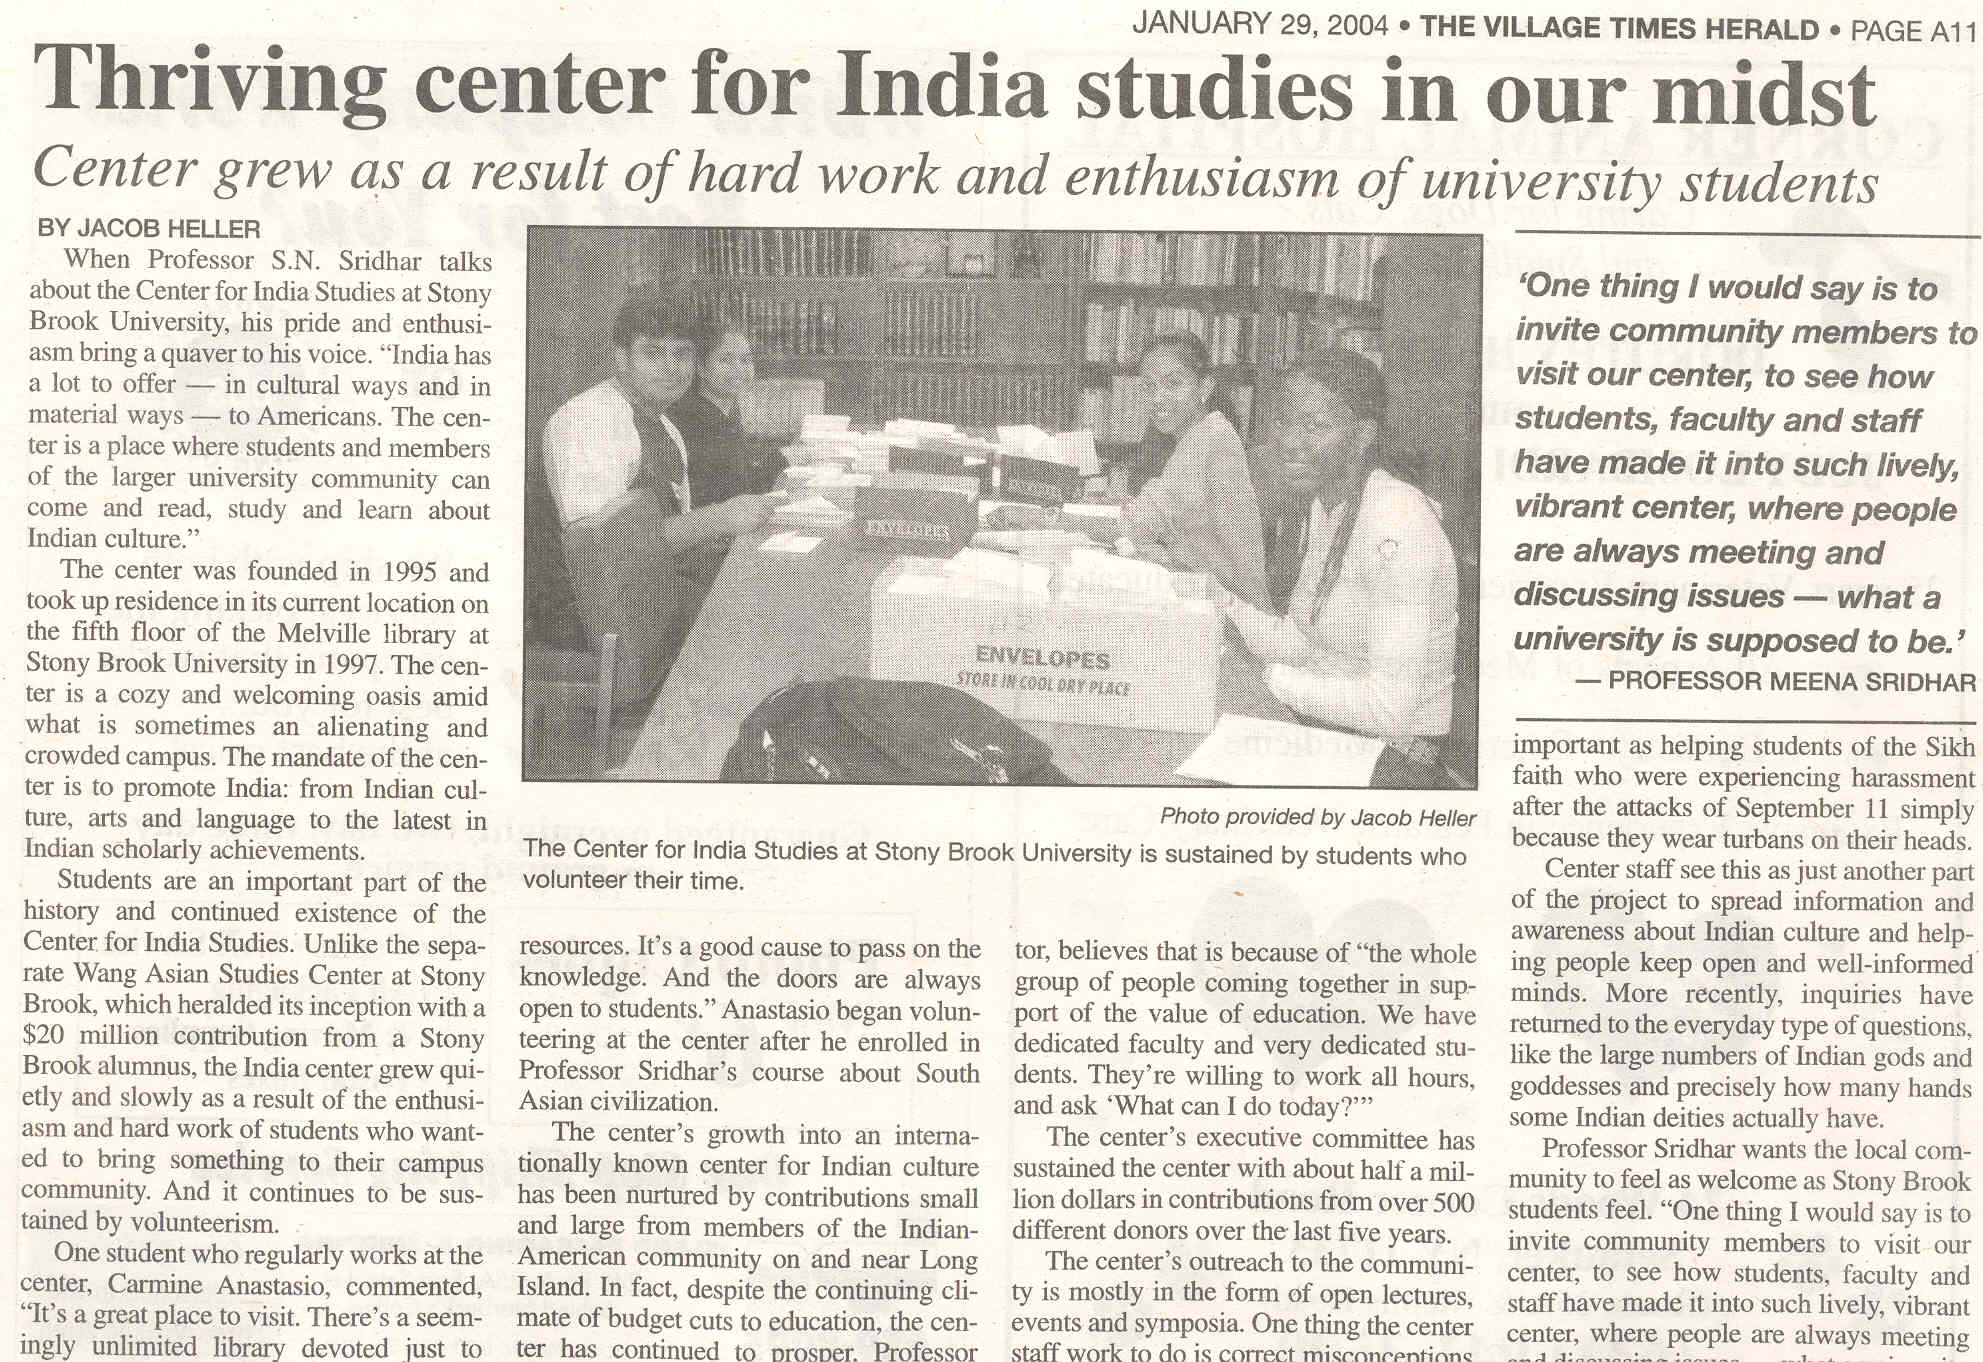 Thriving Center for India Studies TN